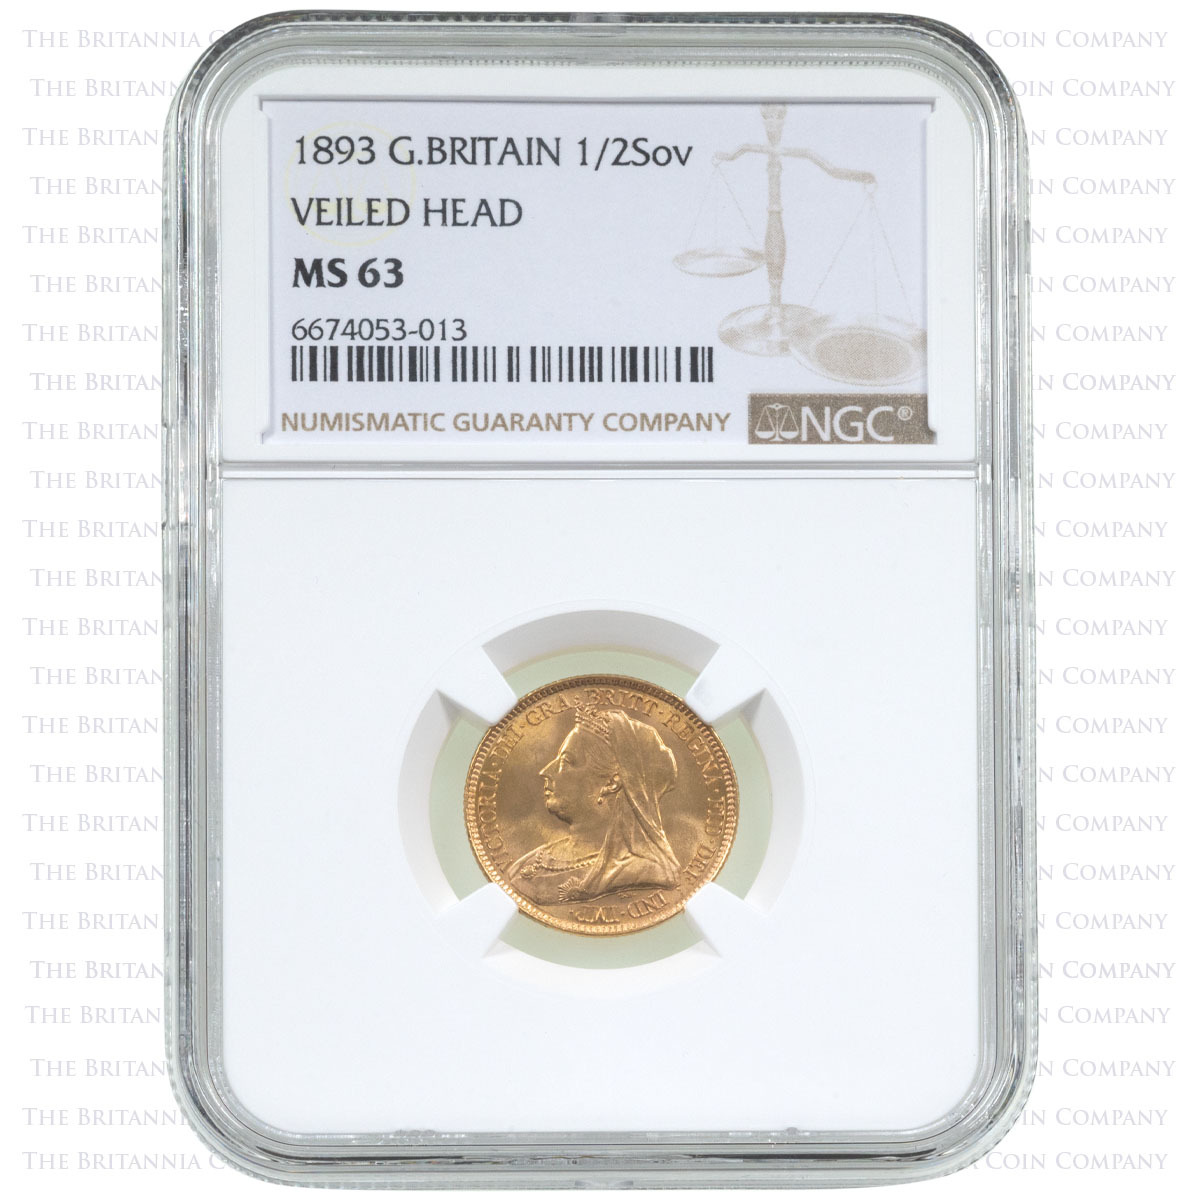 1893 Queen Victoria Gold Half Sovereign London Mint Jubilee Head NGC Graded MS 63 Holder